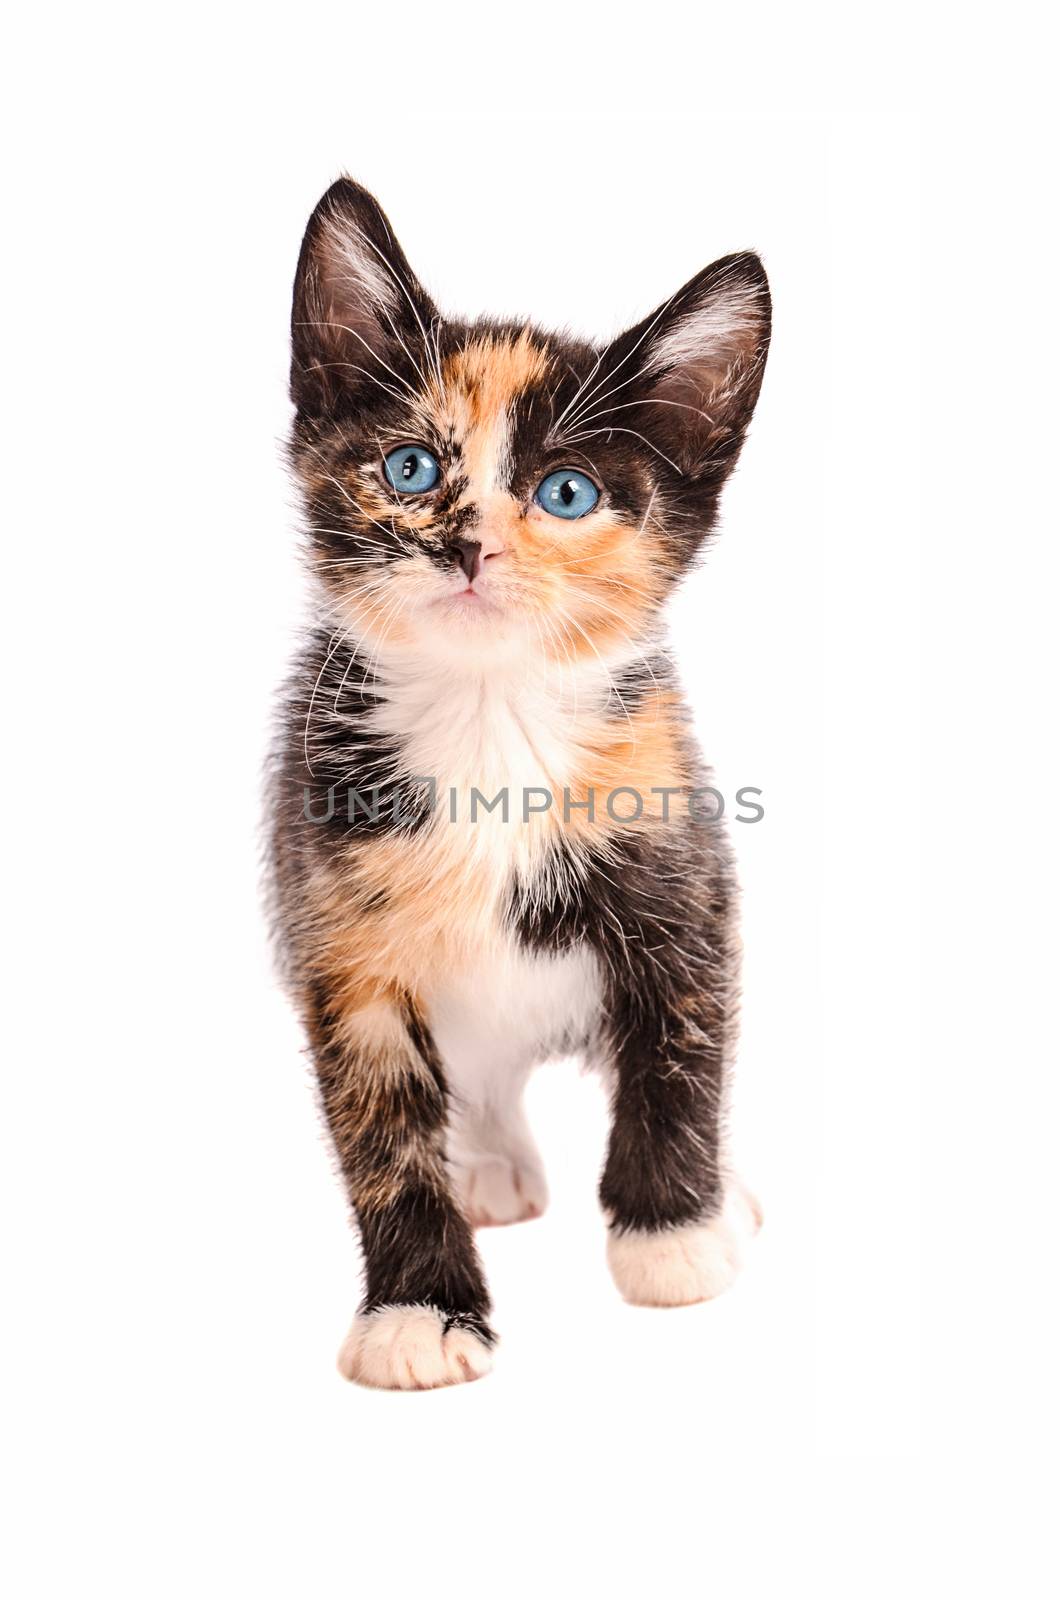 A calico kitten with blue eyes, standing on a white background